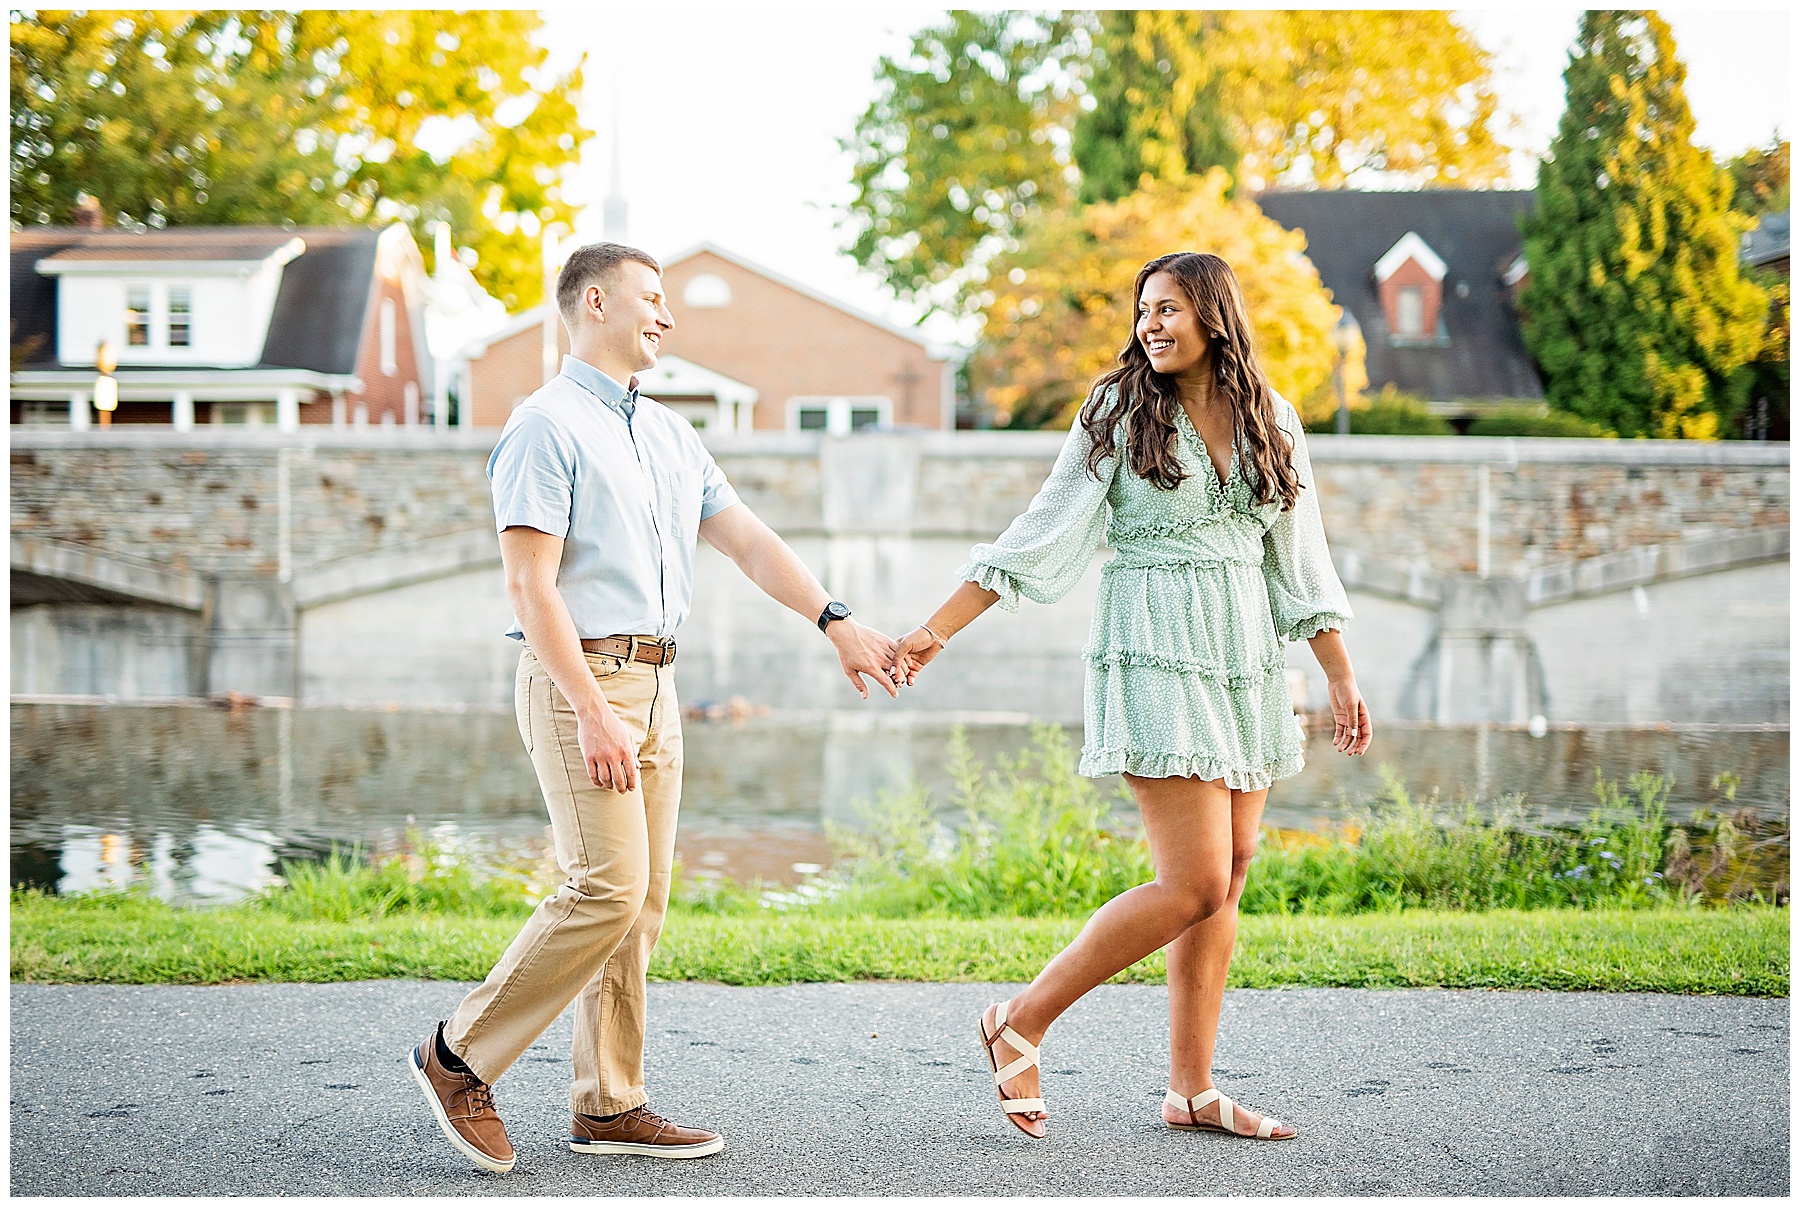 DOWNTOWN FREDERICK MD ENGAGEMENT SESSION